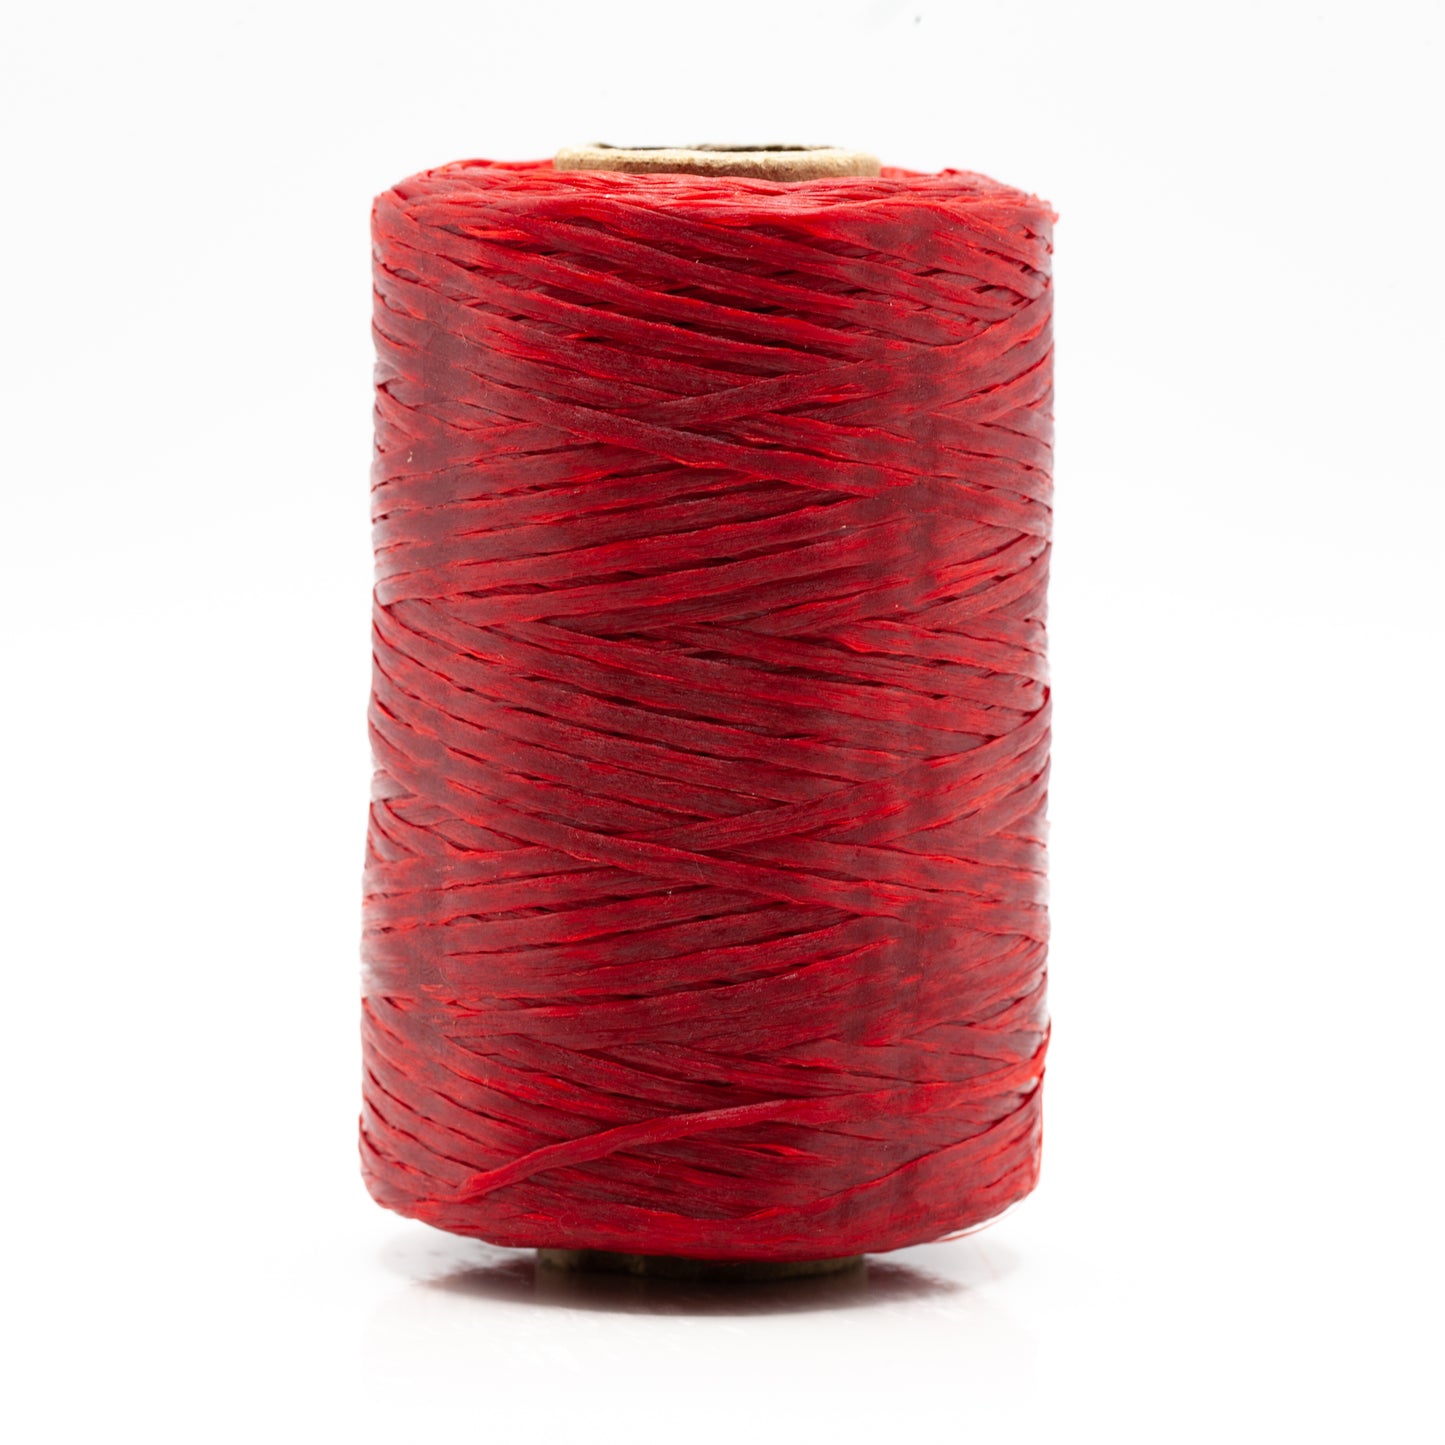 Waxed, Artificial Sinew Thread - Red (stand)